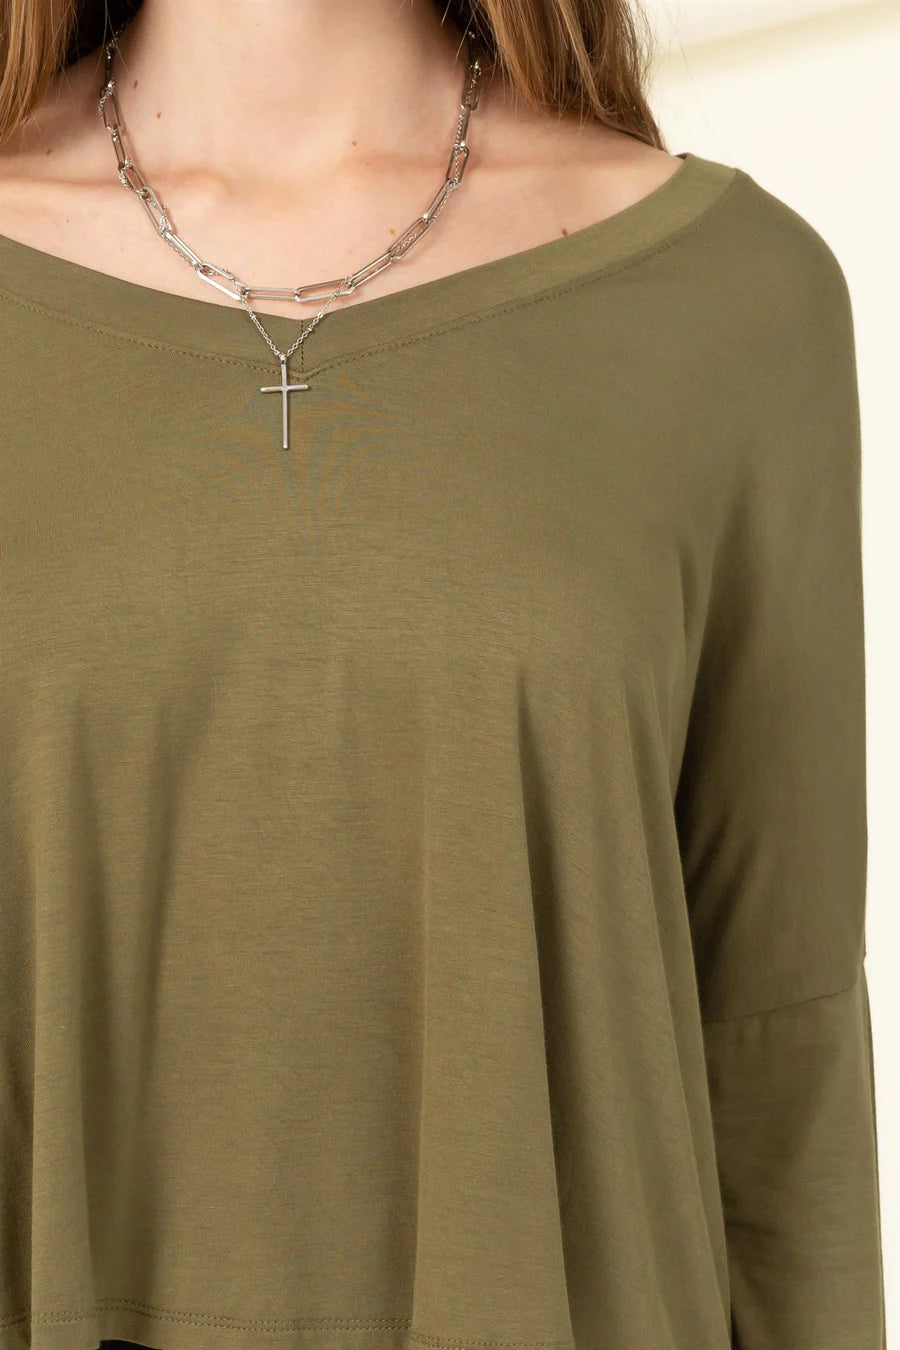 A woman wearing an Olive | Love Me Right V Neck Loose Fit Top by HYFVE with a cross necklace.